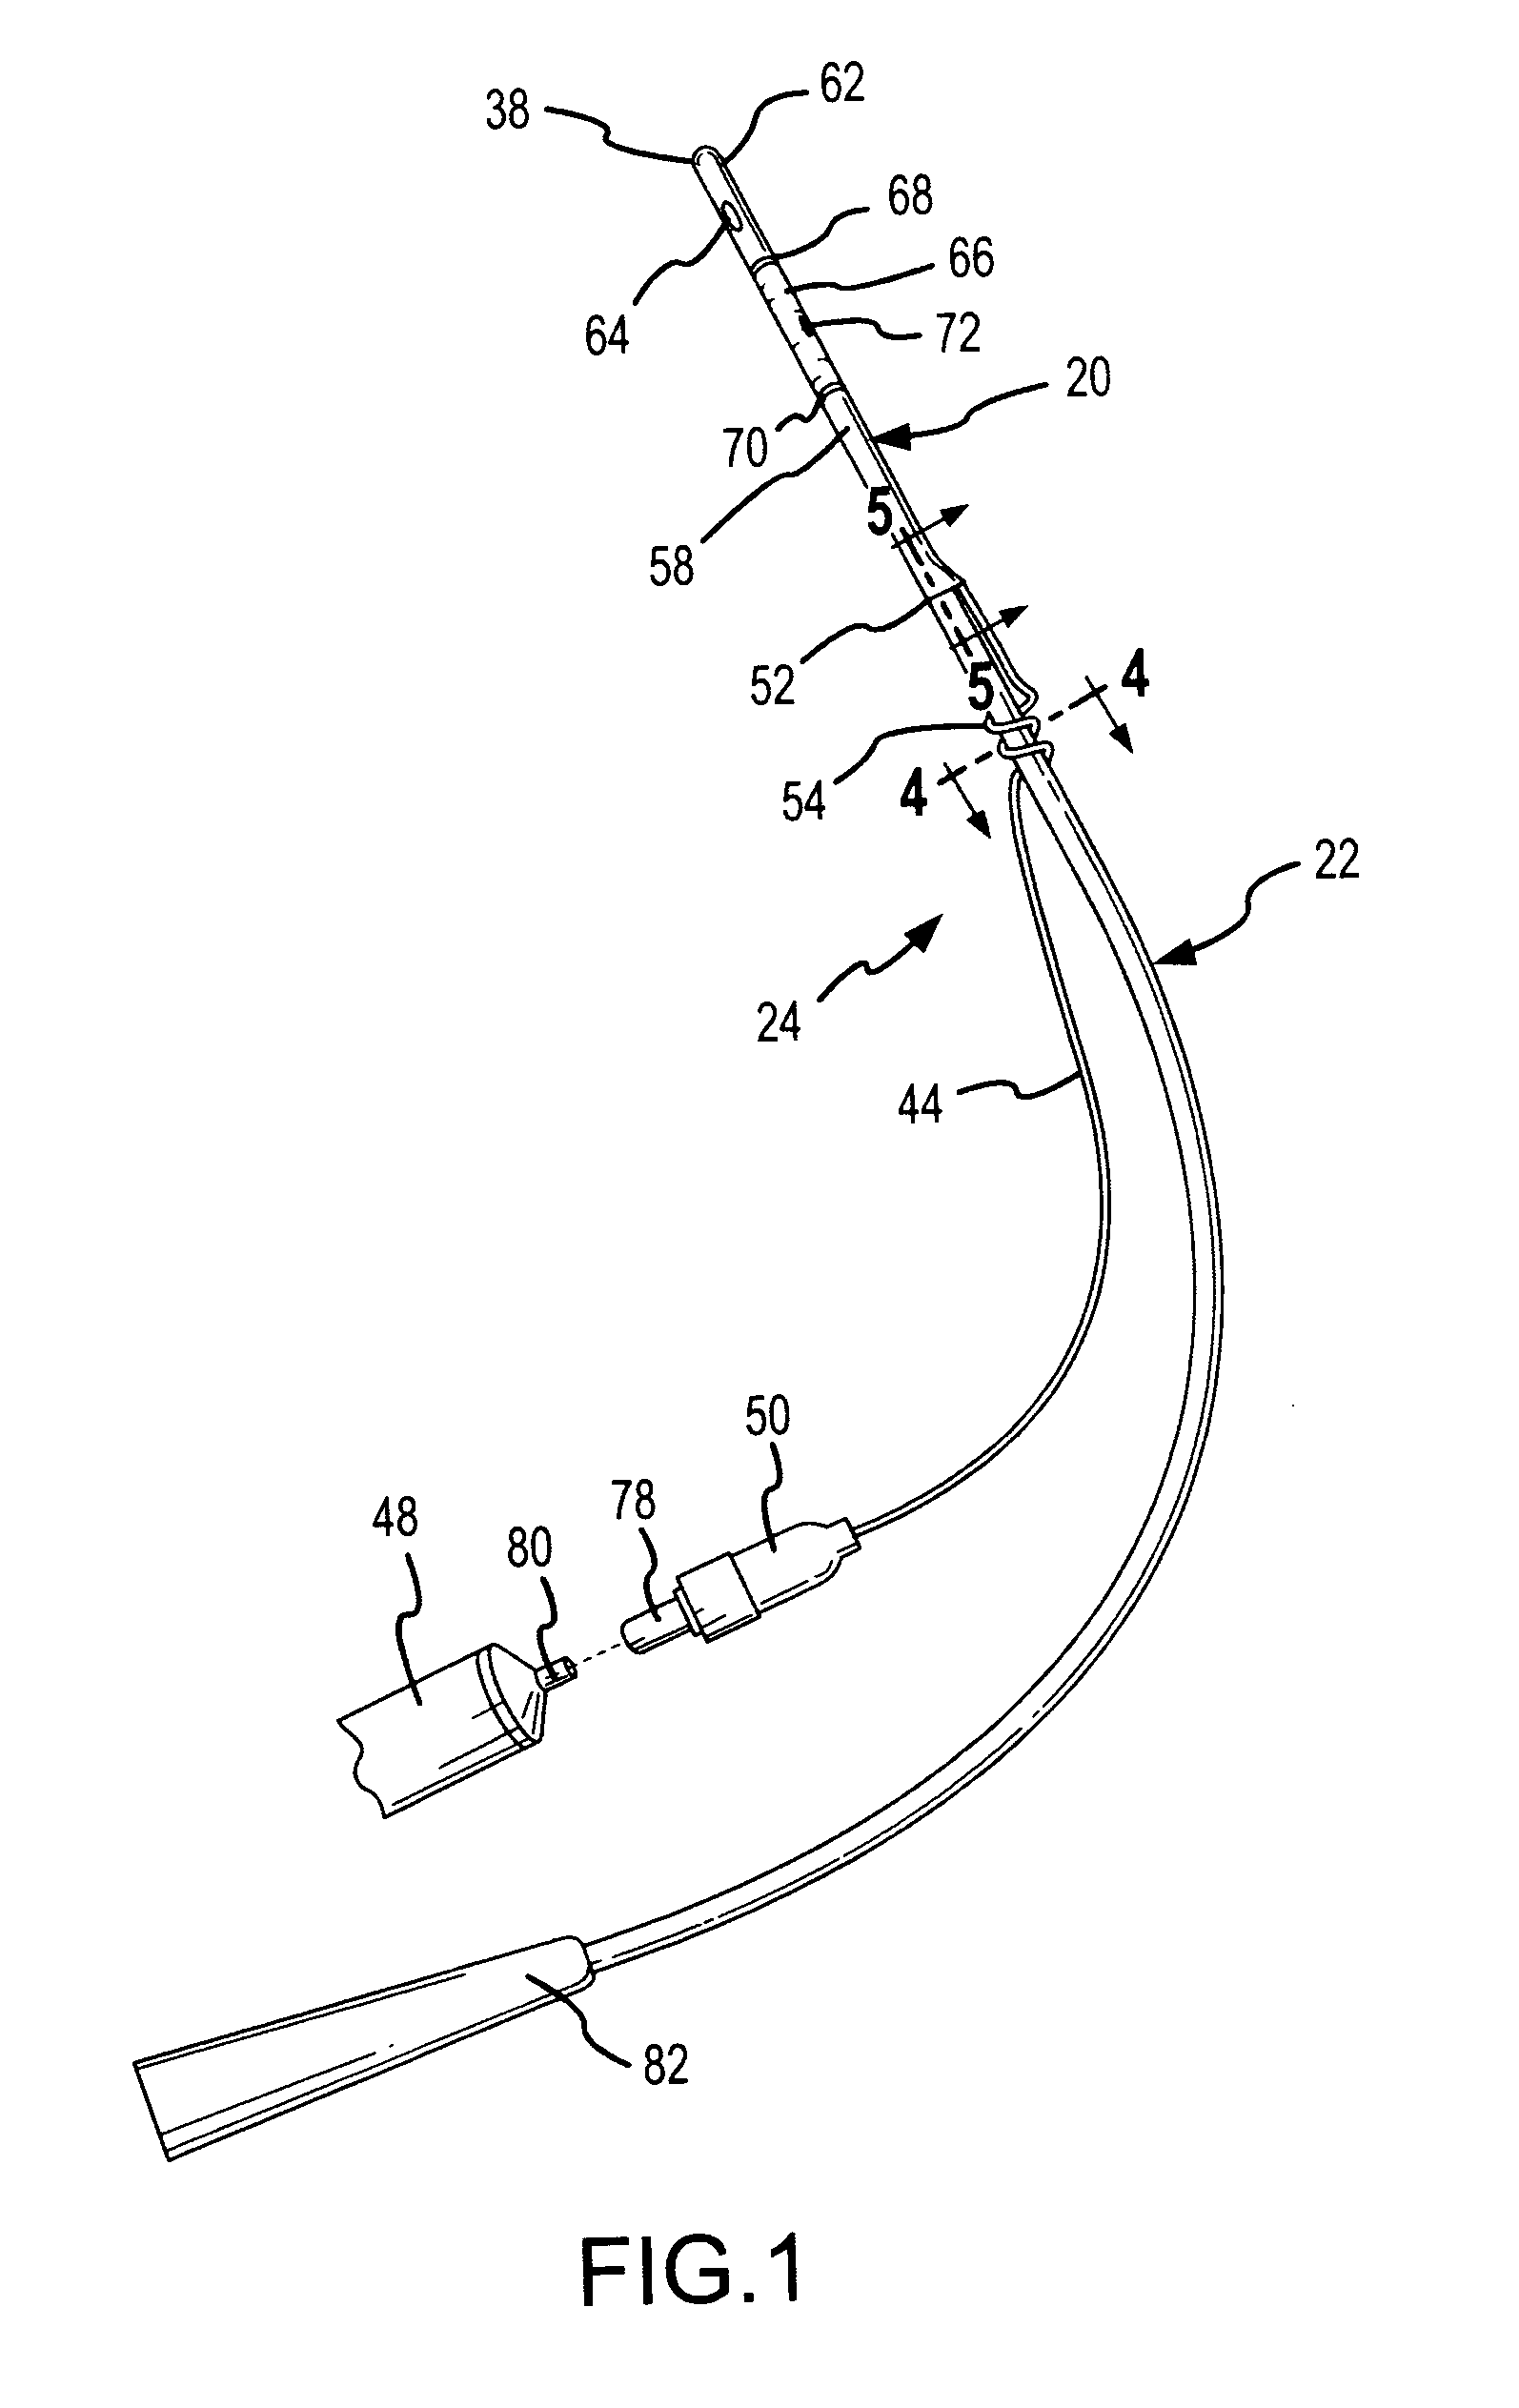 Partial-length, indwelling prostatic catheter using coiled inflation tube as an anchor and methods of draining urine and flushing clots